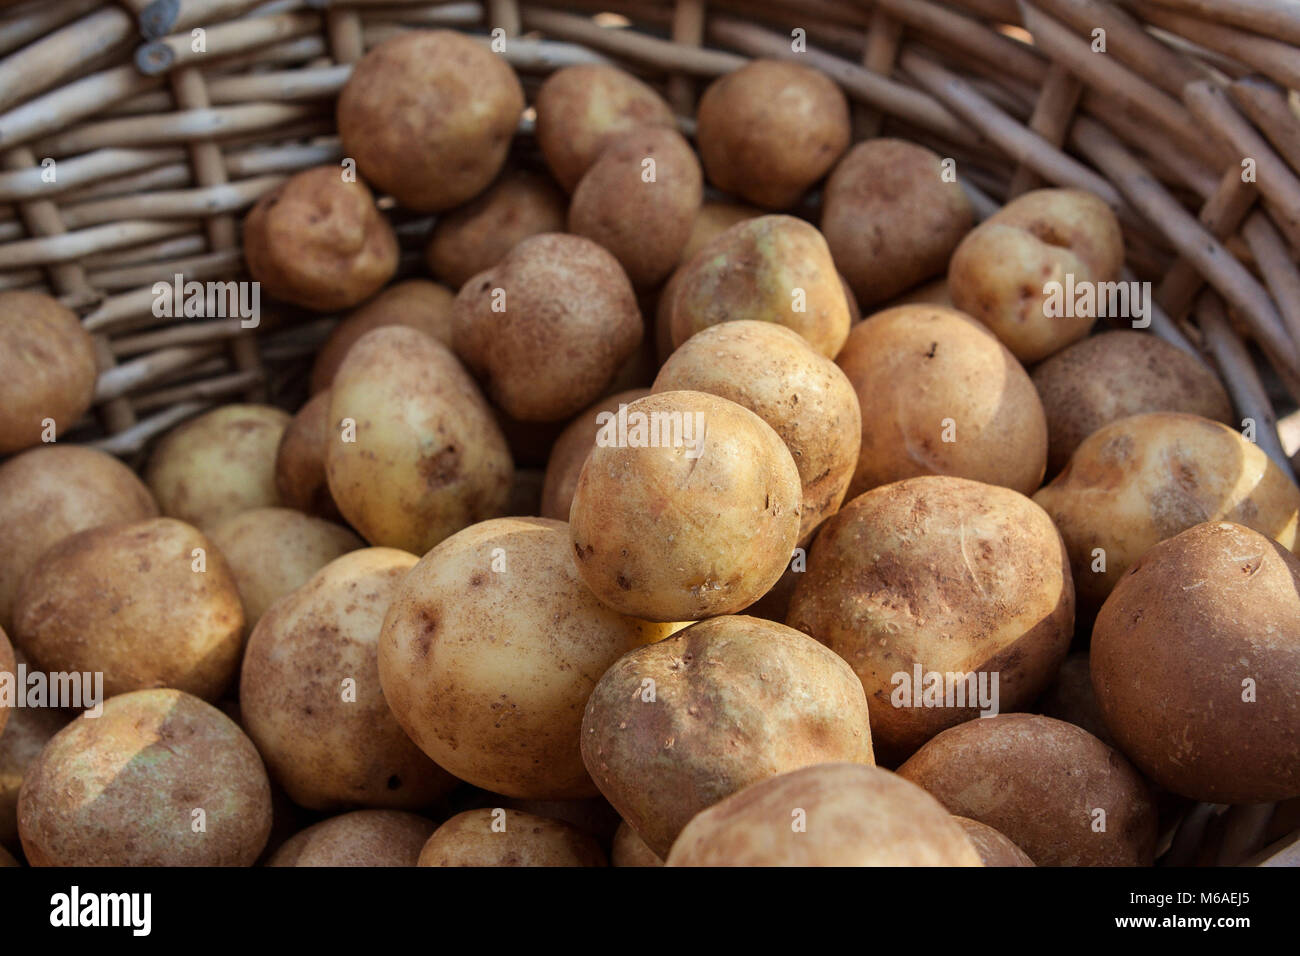 Wicker basket of potatoes sits on sale at local farmers market. Stock Photo